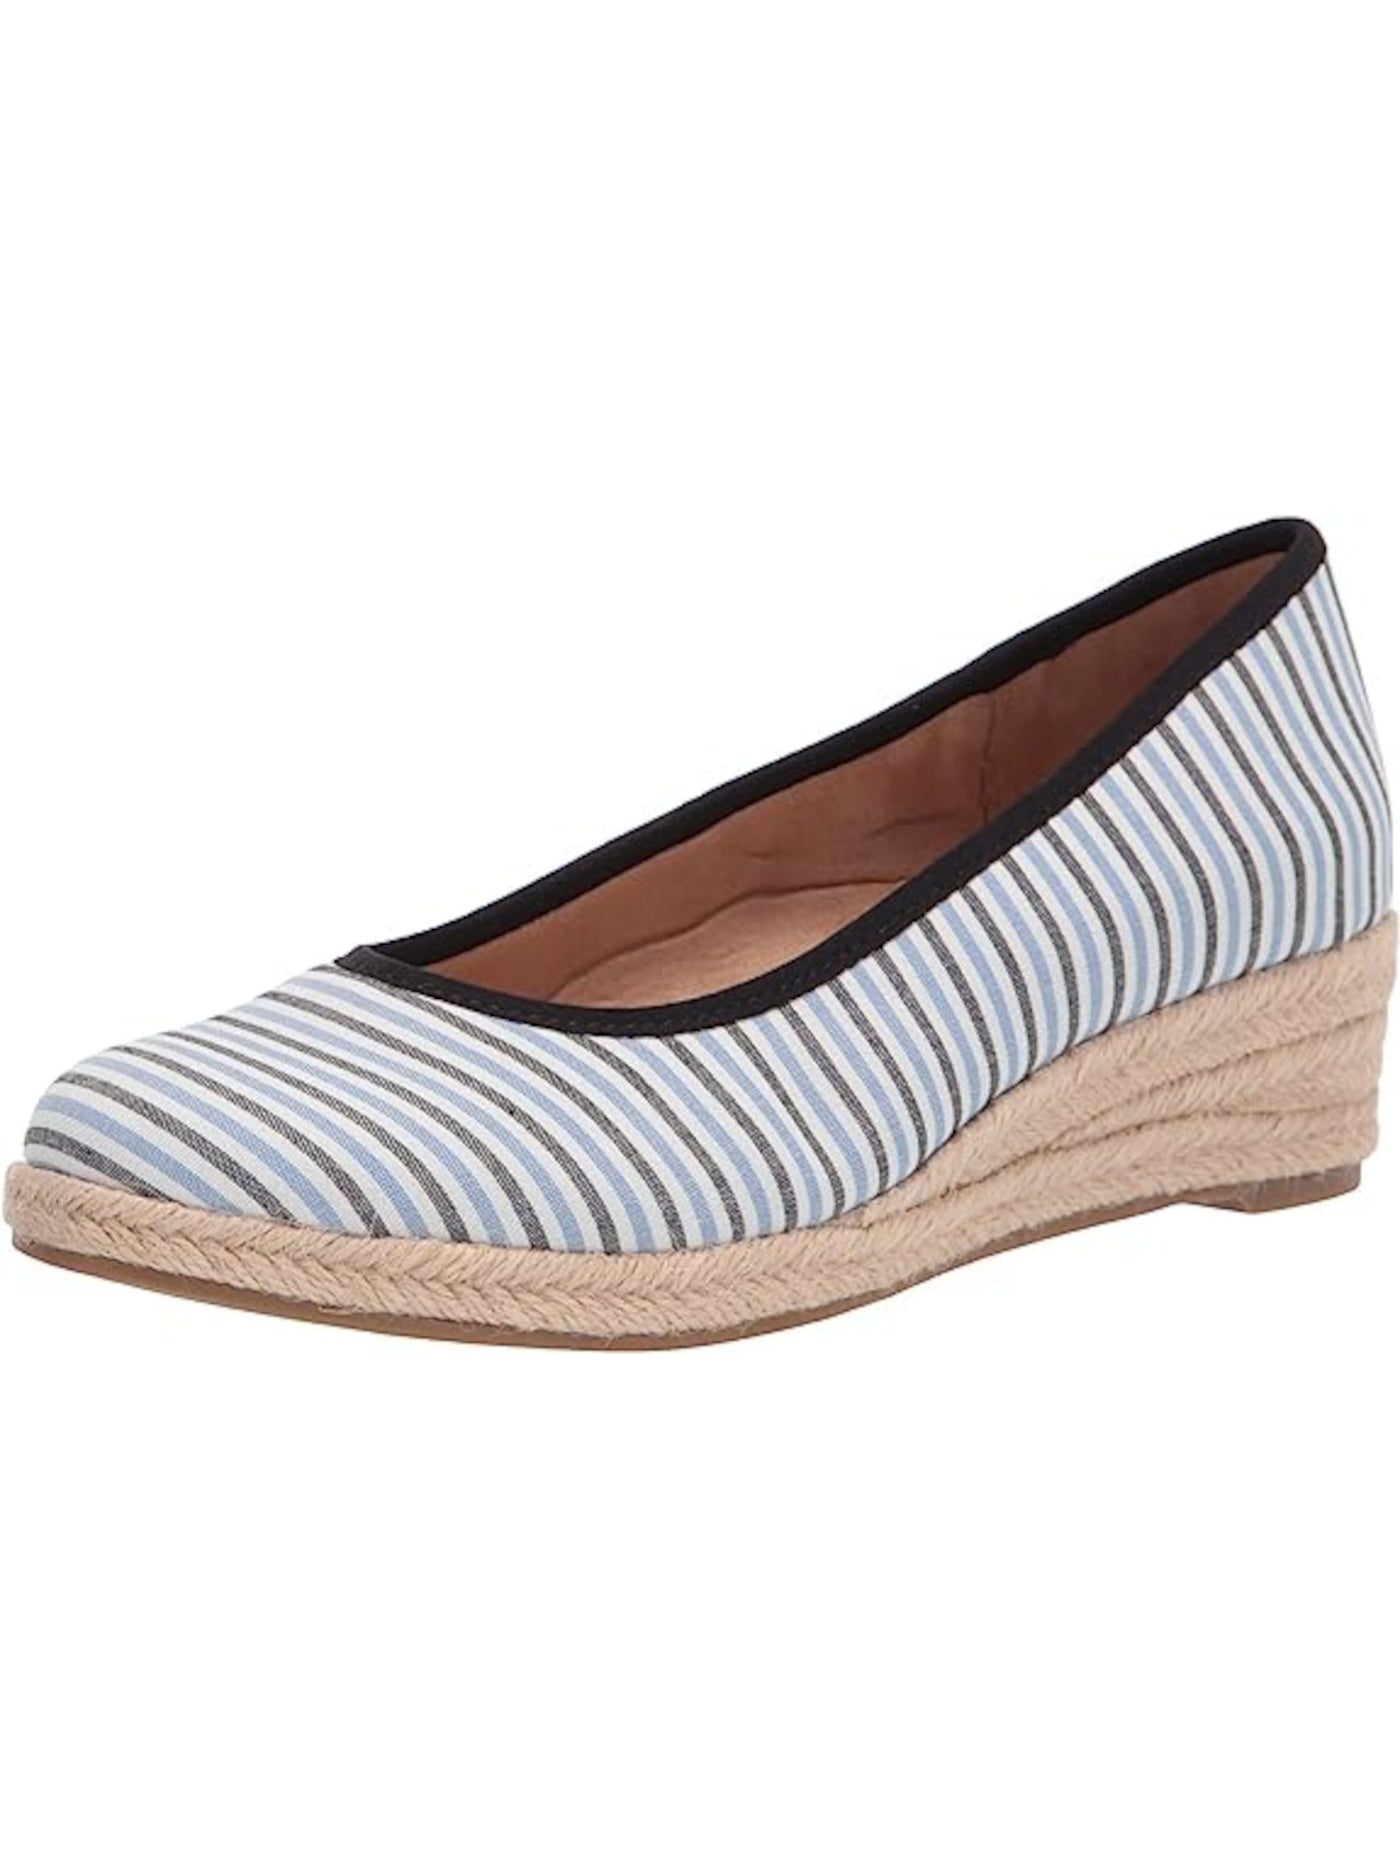 LIFE STRIDE VELOCITY Womens Light Blue Striped Padded Woven Karma Round Toe Wedge Slip On Espadrille Shoes 11 M